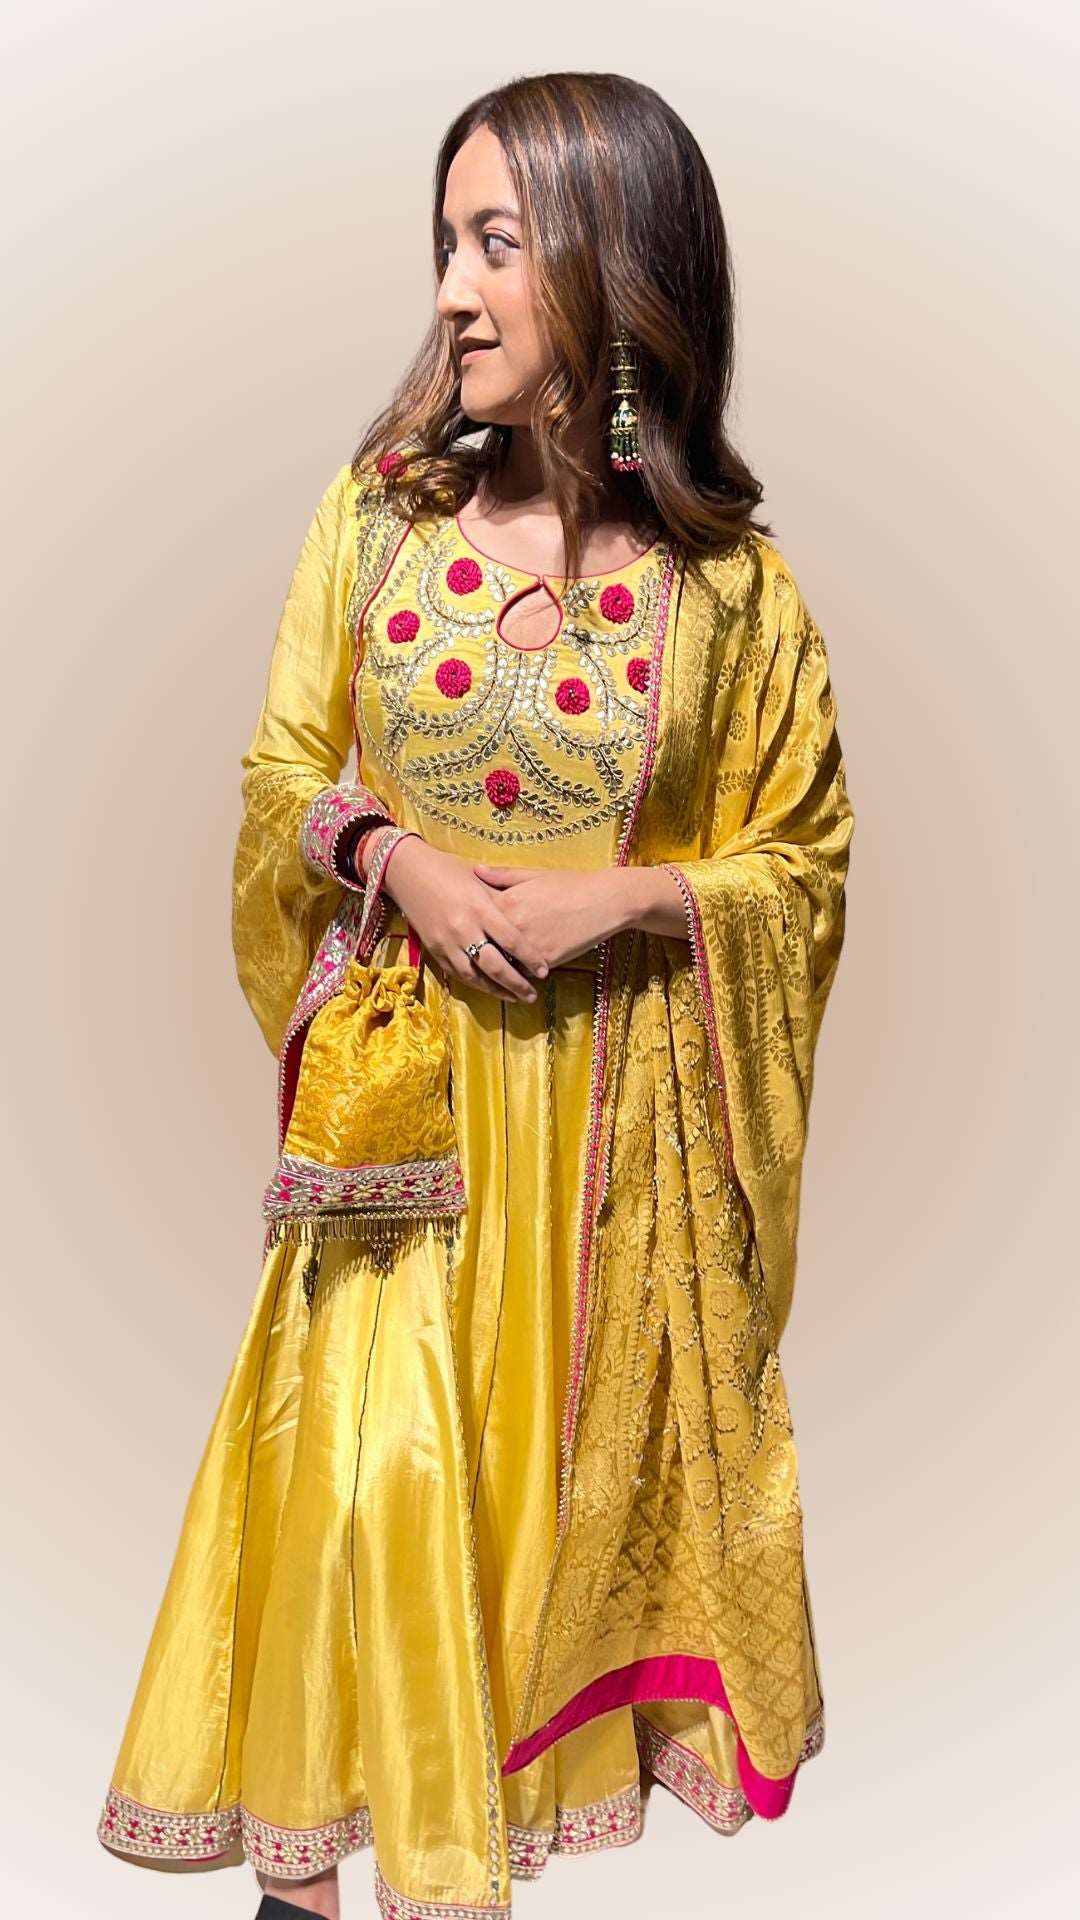 Full Image glowing yellow Anarkali Suit. Upada Silk with Thread and Handmade Gotta Design. Haldi Outfit Destiny by Anjali